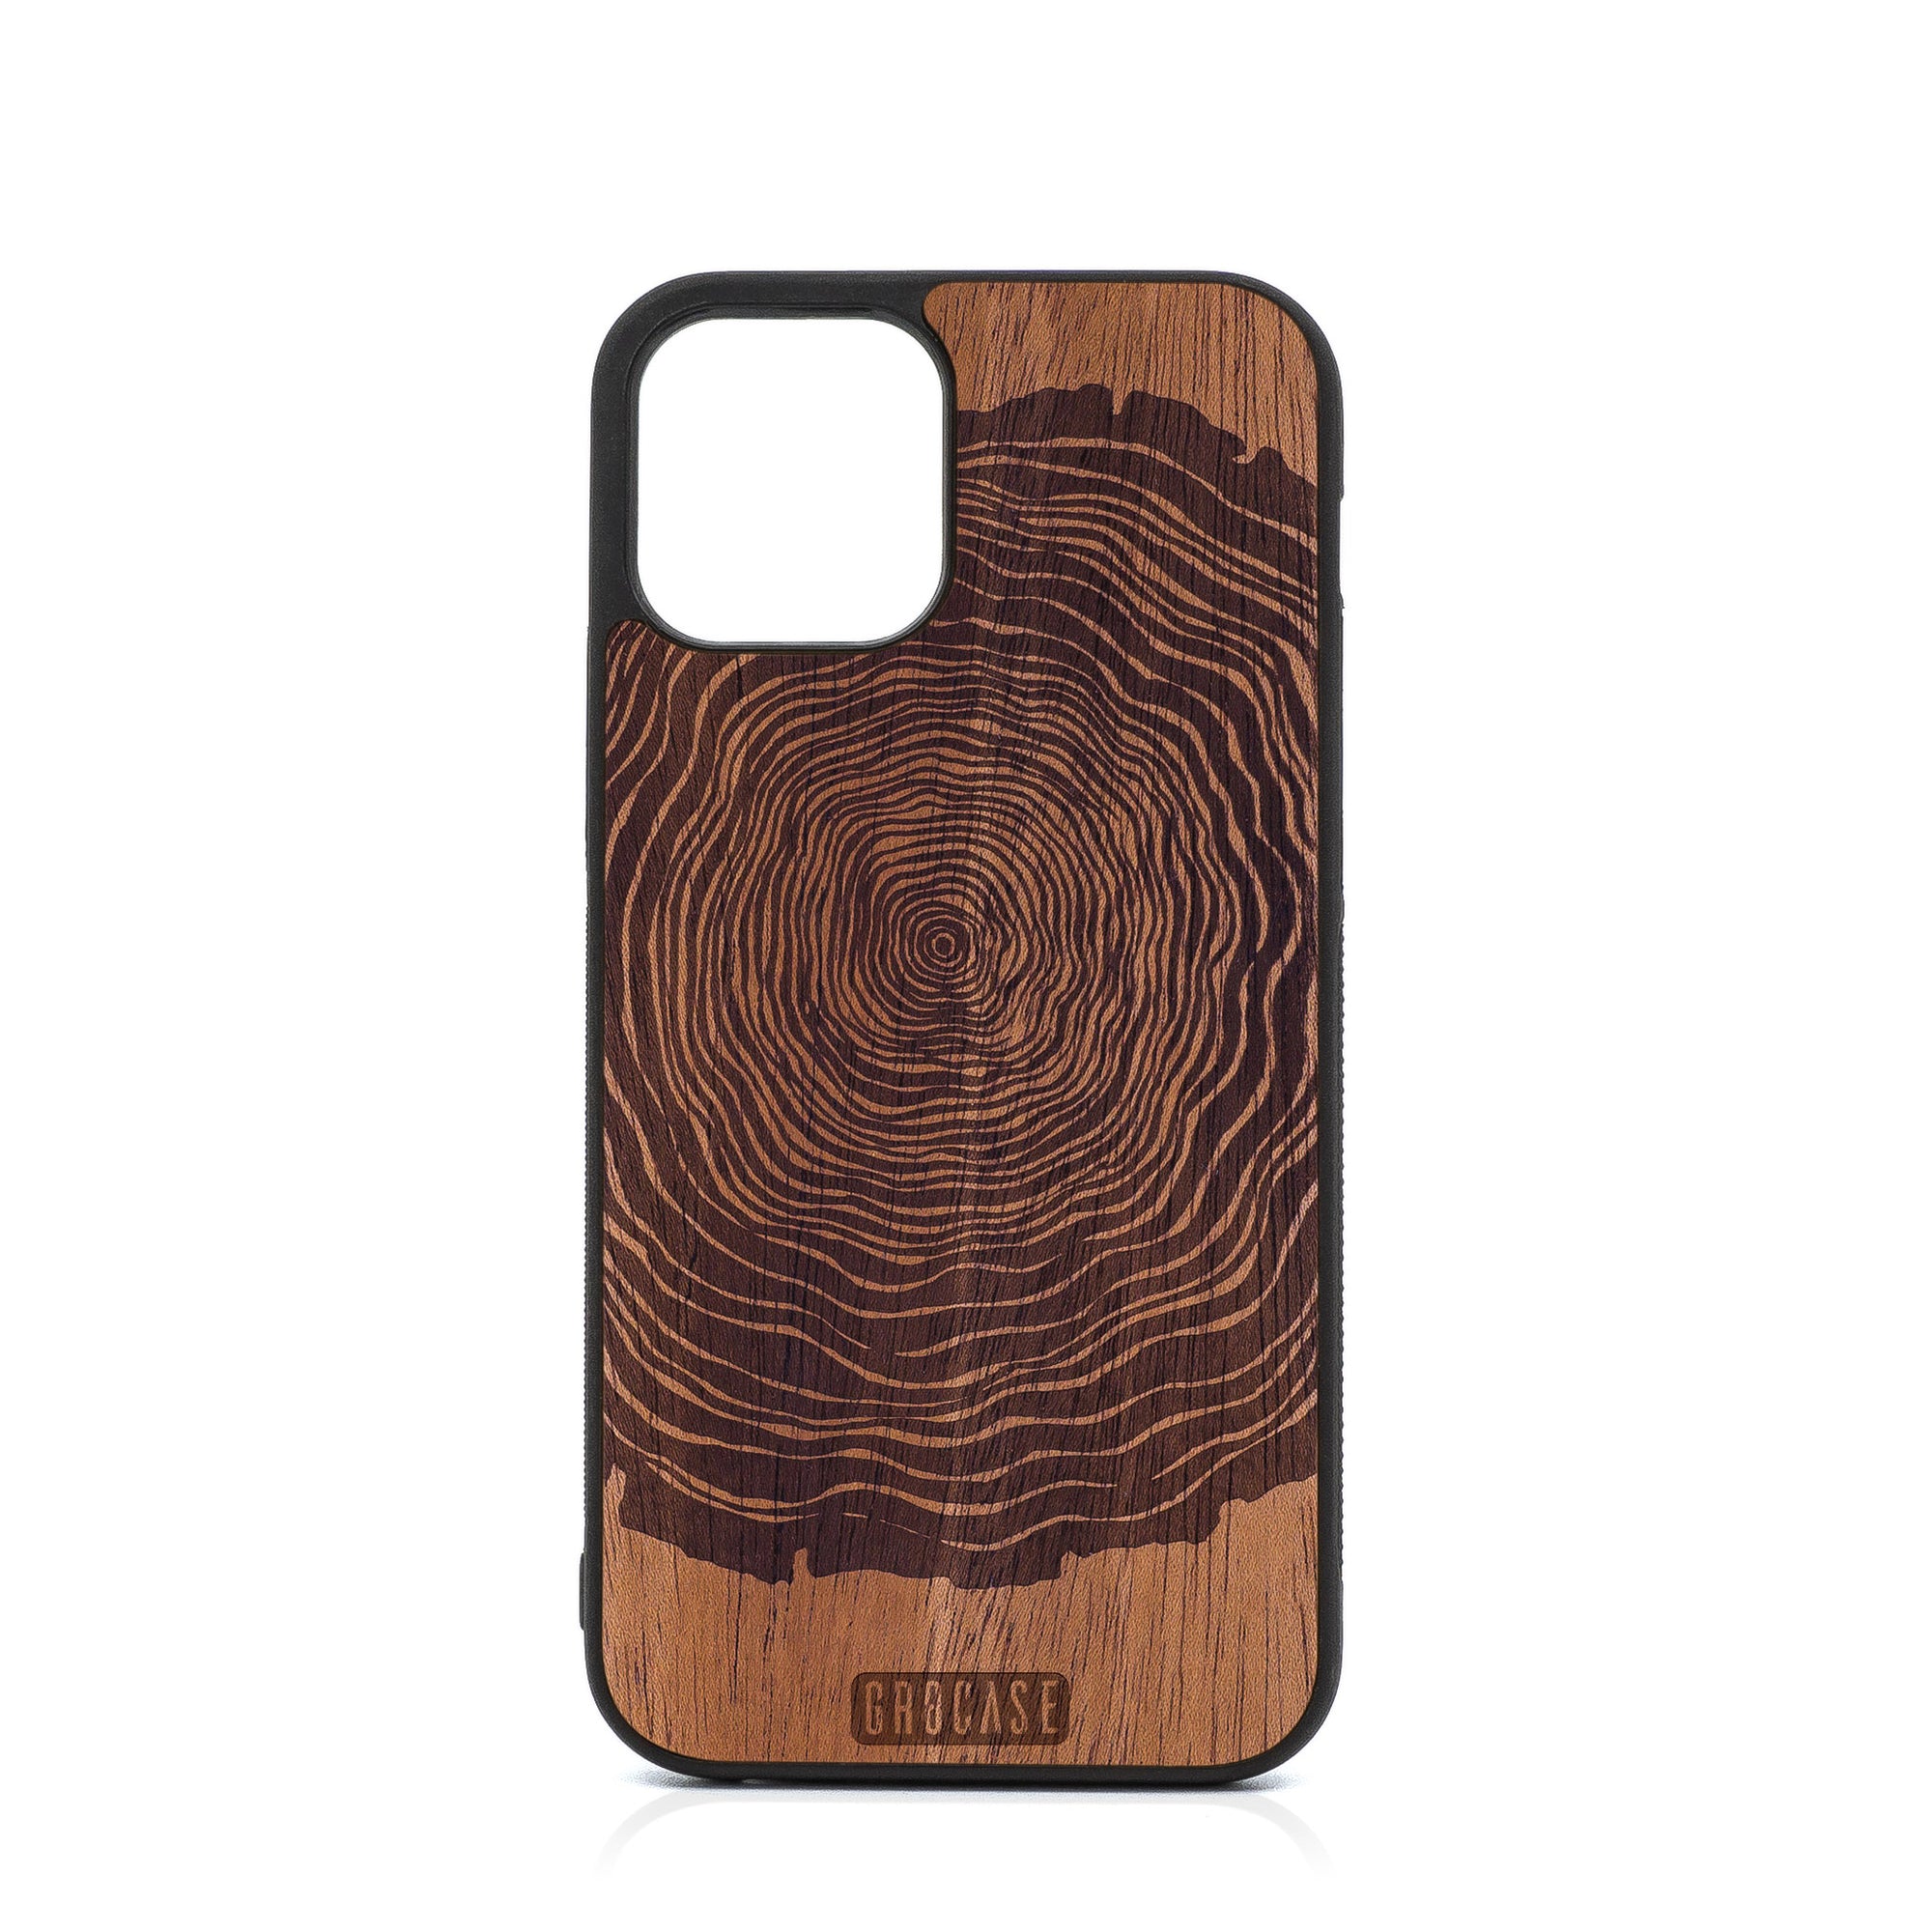 Tree Rings Design Wood Case For iPhone 12